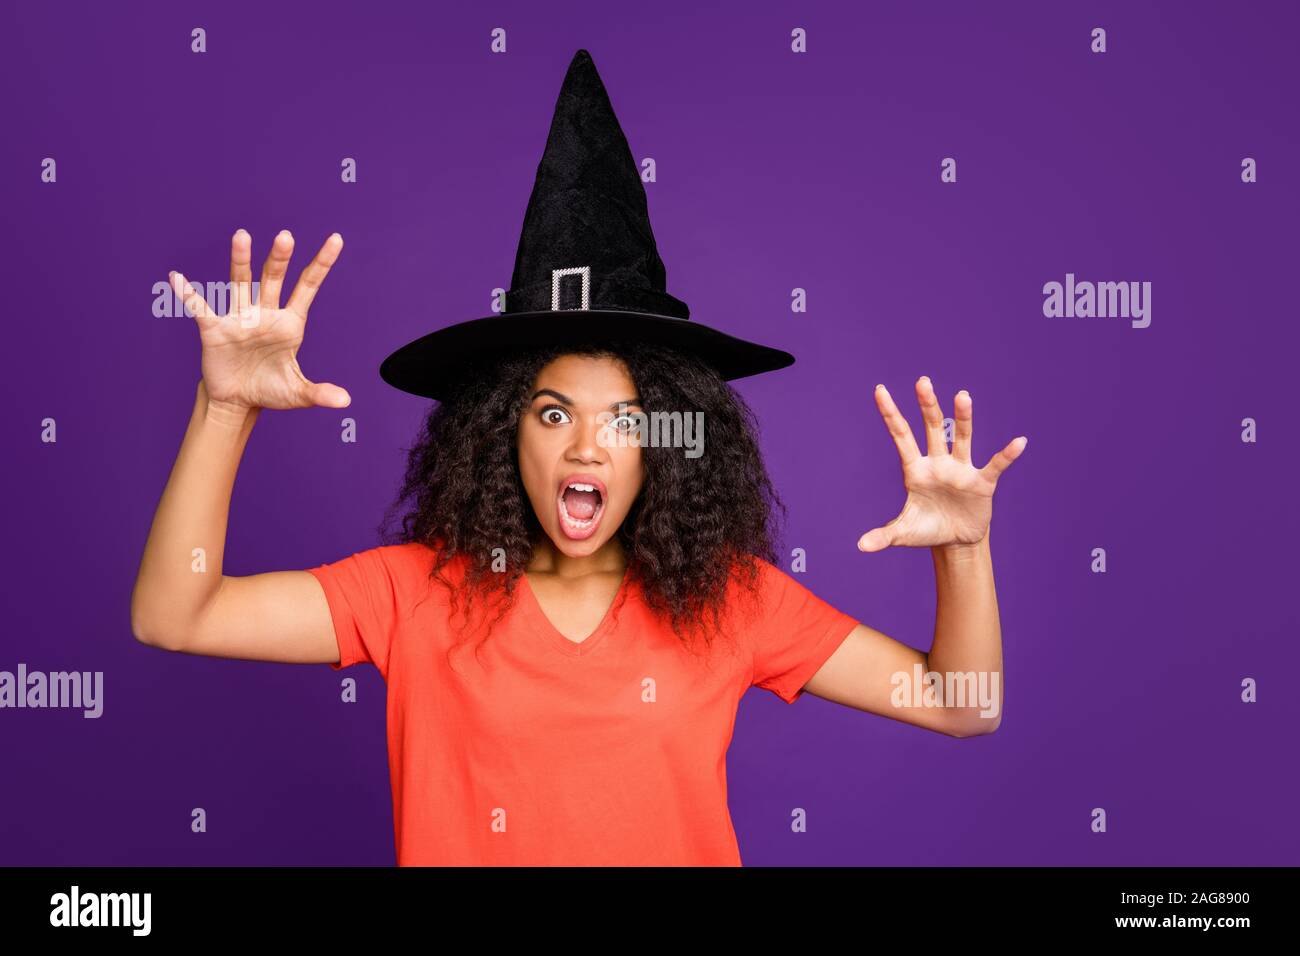 Photo of scary terrible spooky frightful warlock wearing conical cap casting spell to curse you with horrifying facial expression in orange t-shirt Stock Photo